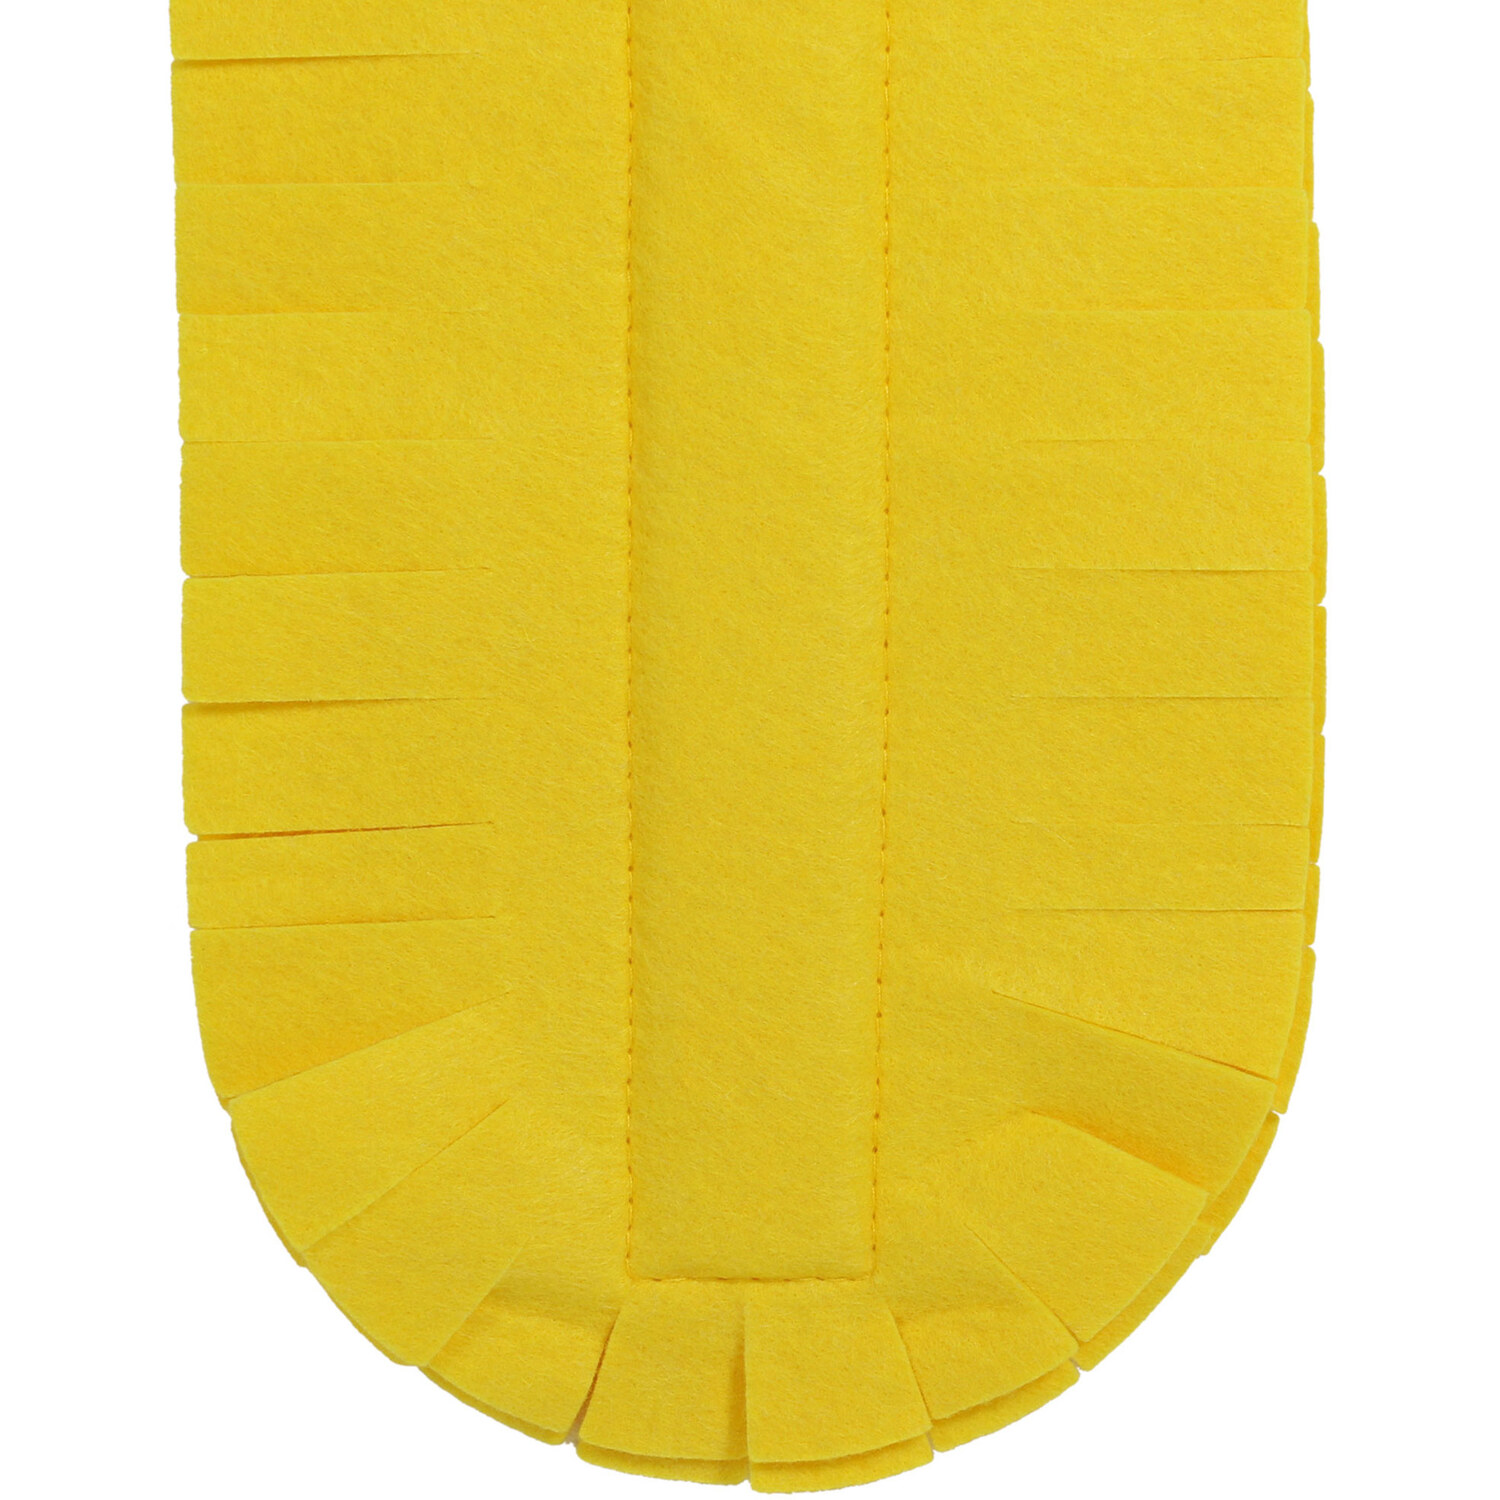 My Home Flexible Cleaning Duster - Yellow Image 5